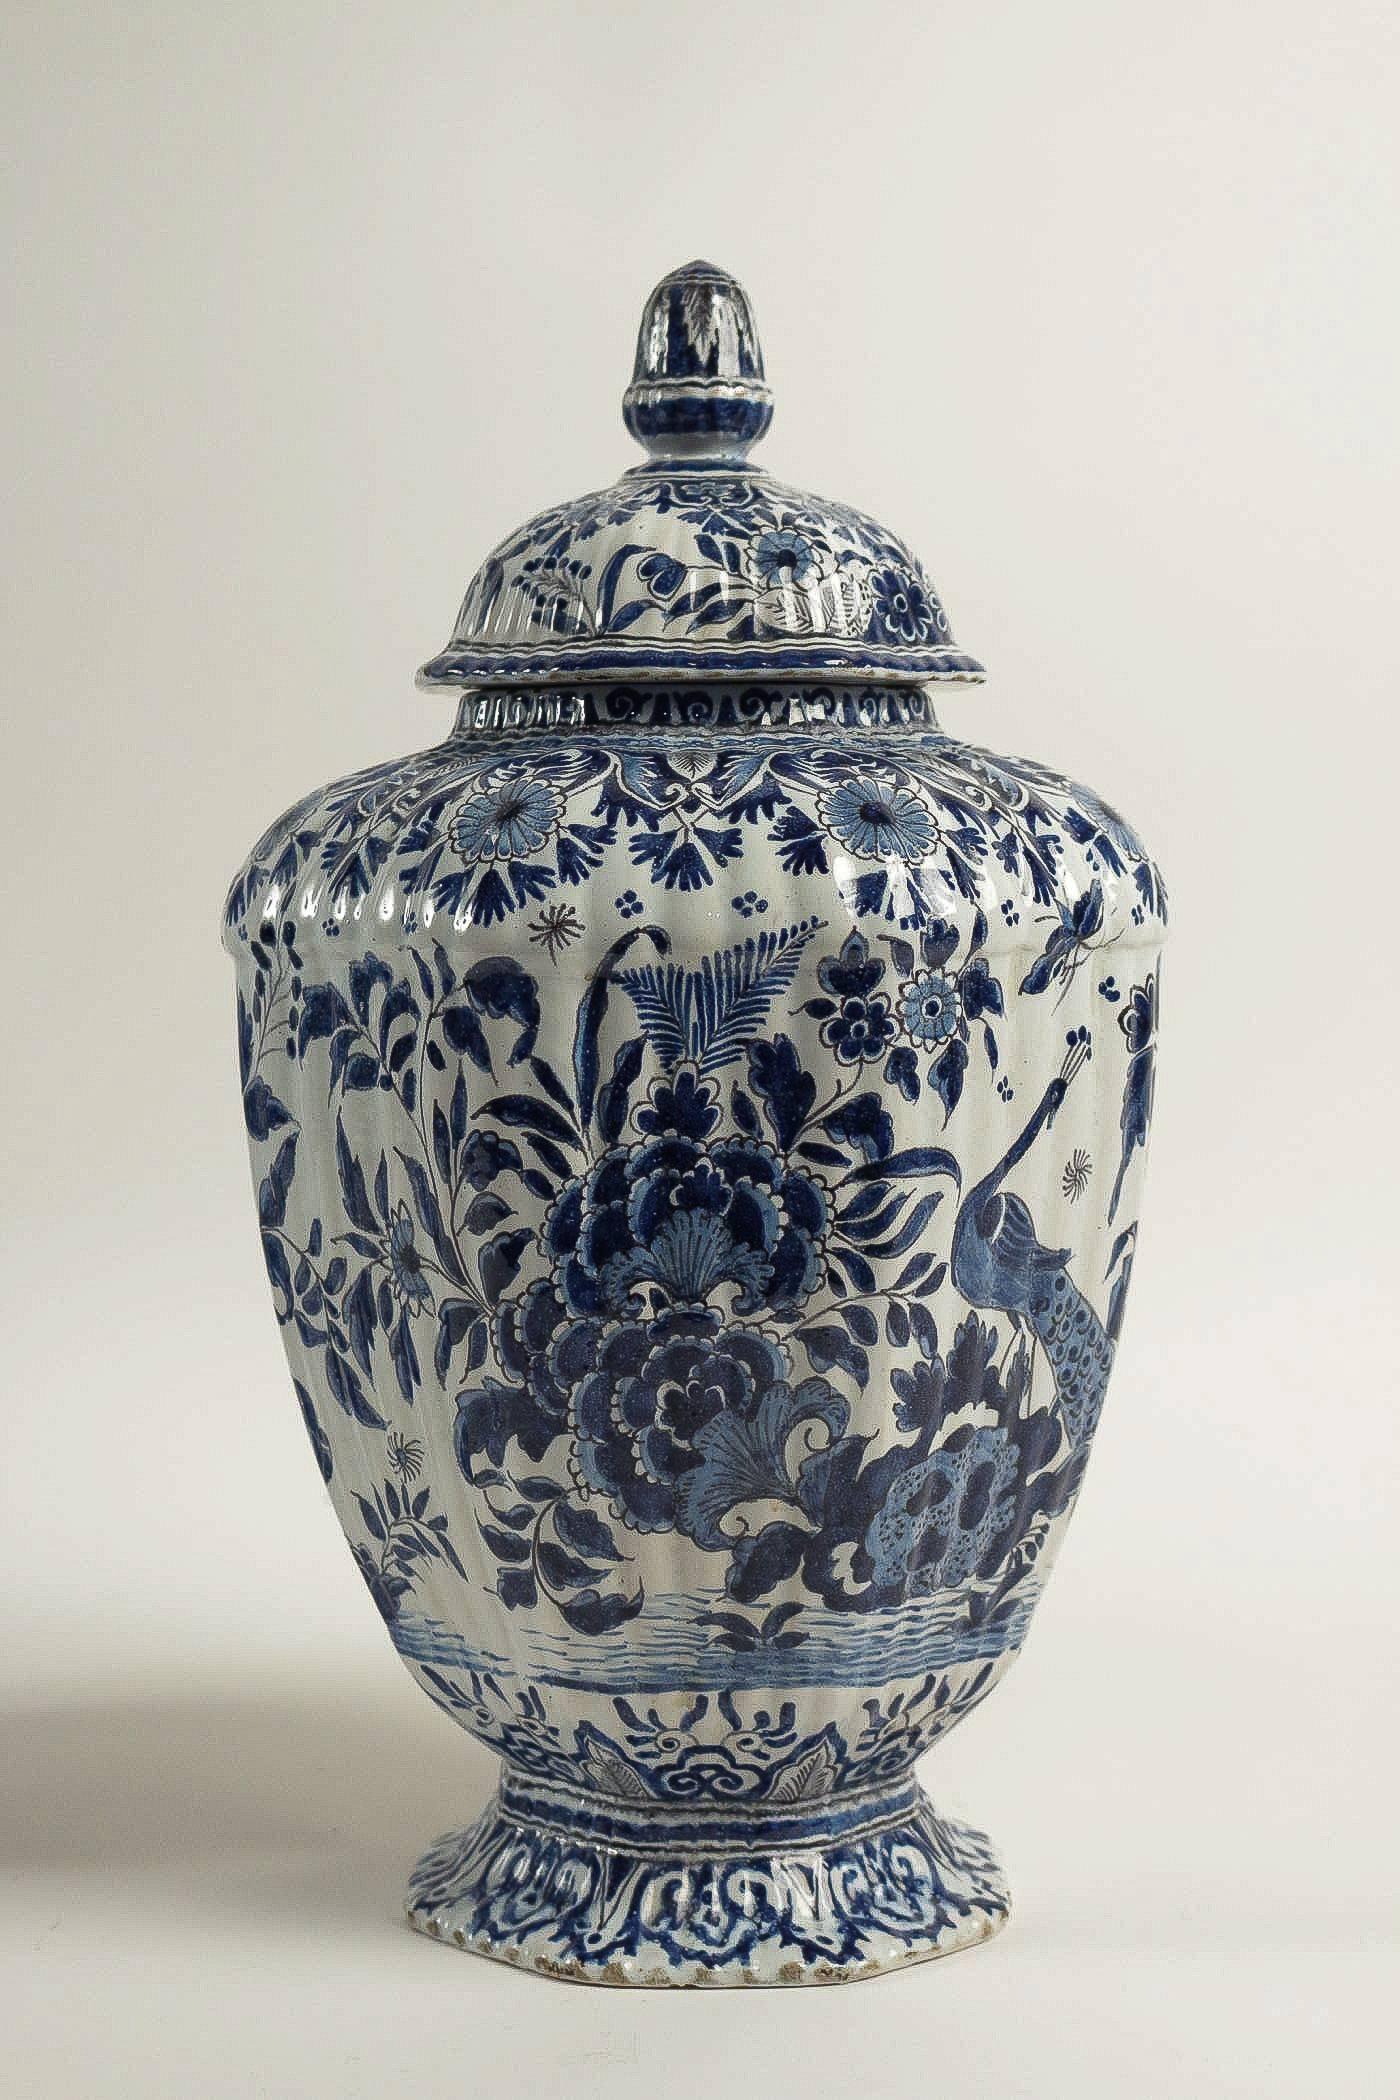 Dutch Netherlands Early 19th Century Pair of Delft Vases, Circa 1820-1840